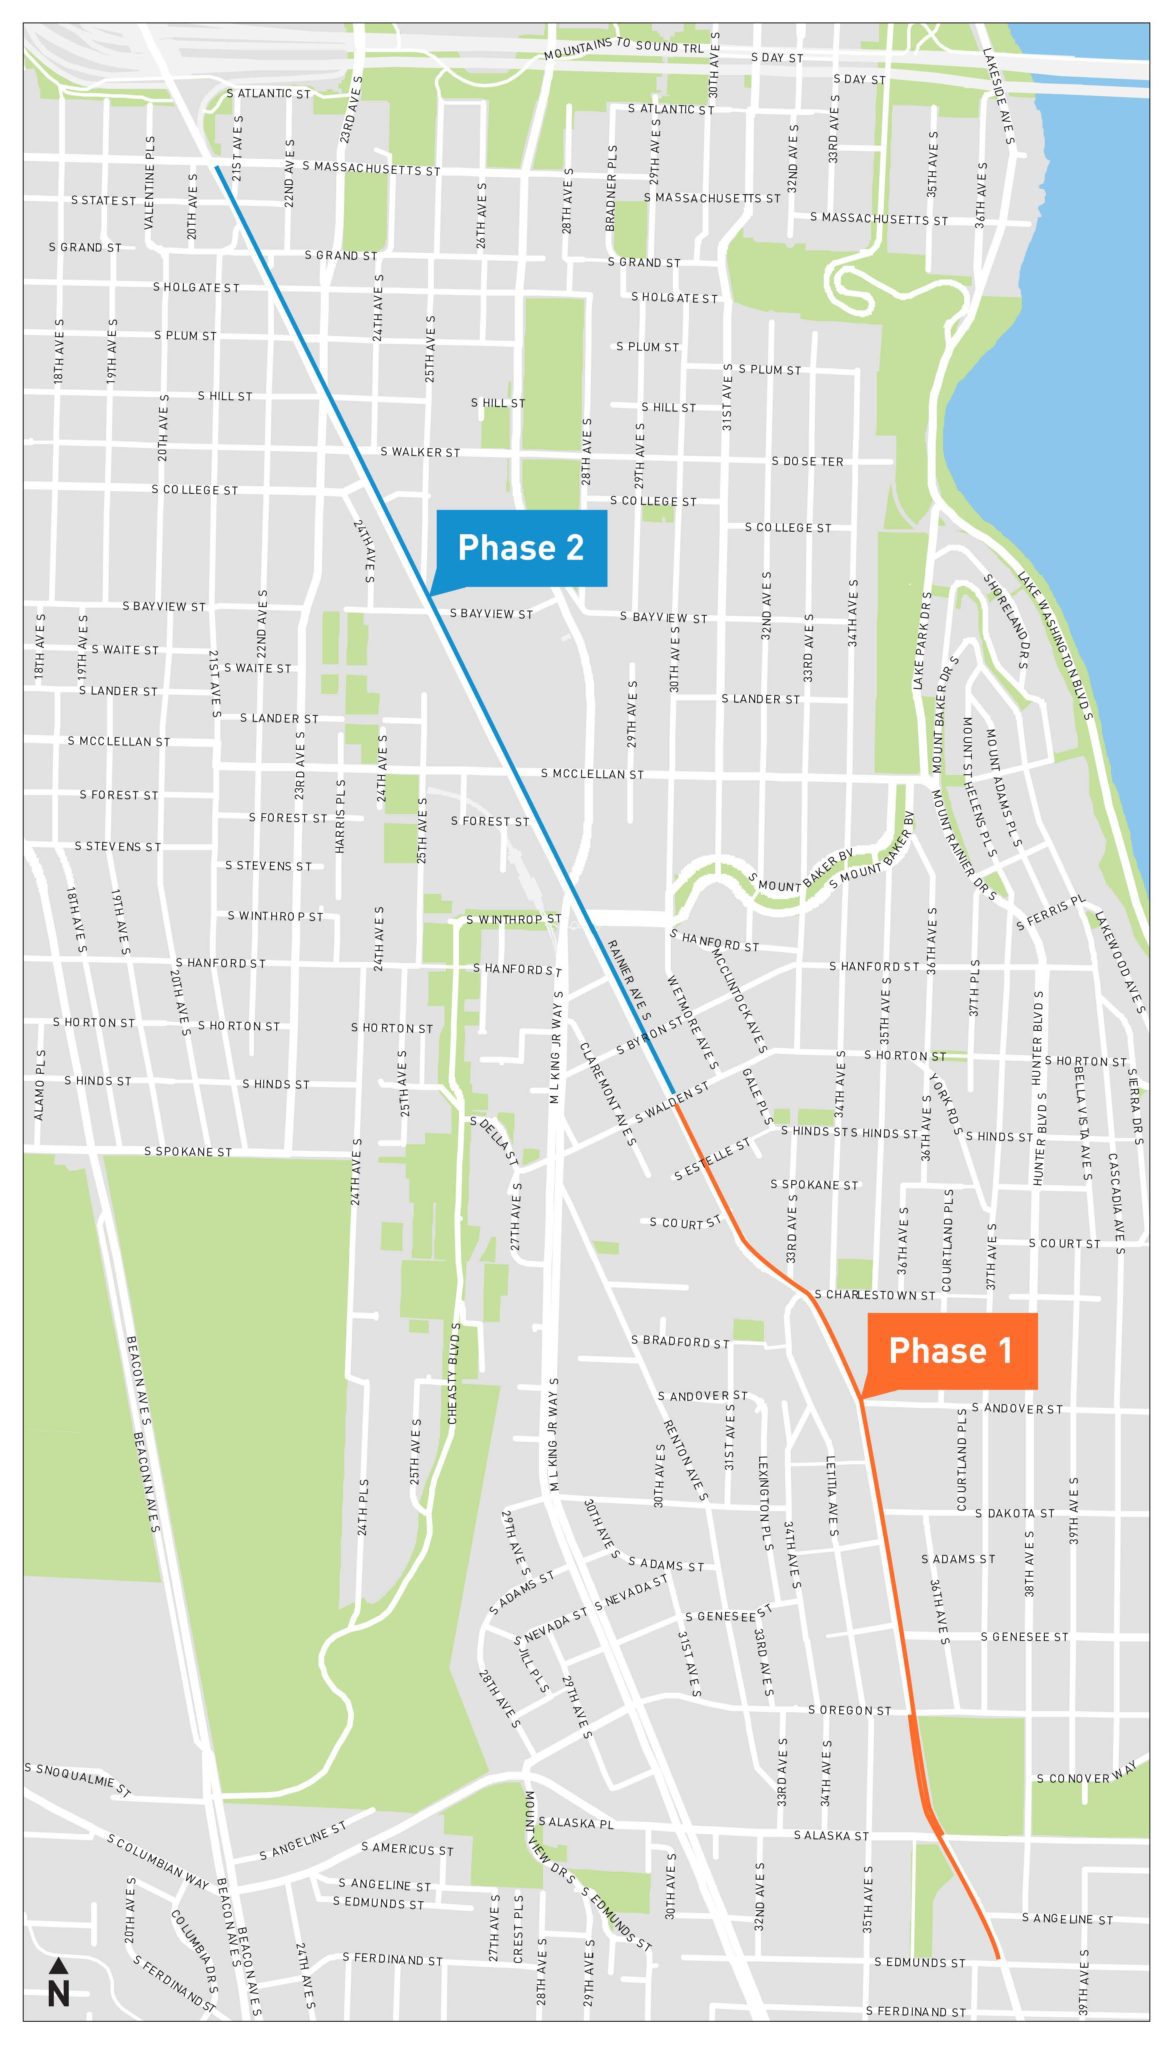 Project area map.  Phase 1 is shown in orange, with Phase 2 shown in a blue line along Rainier Ave S.